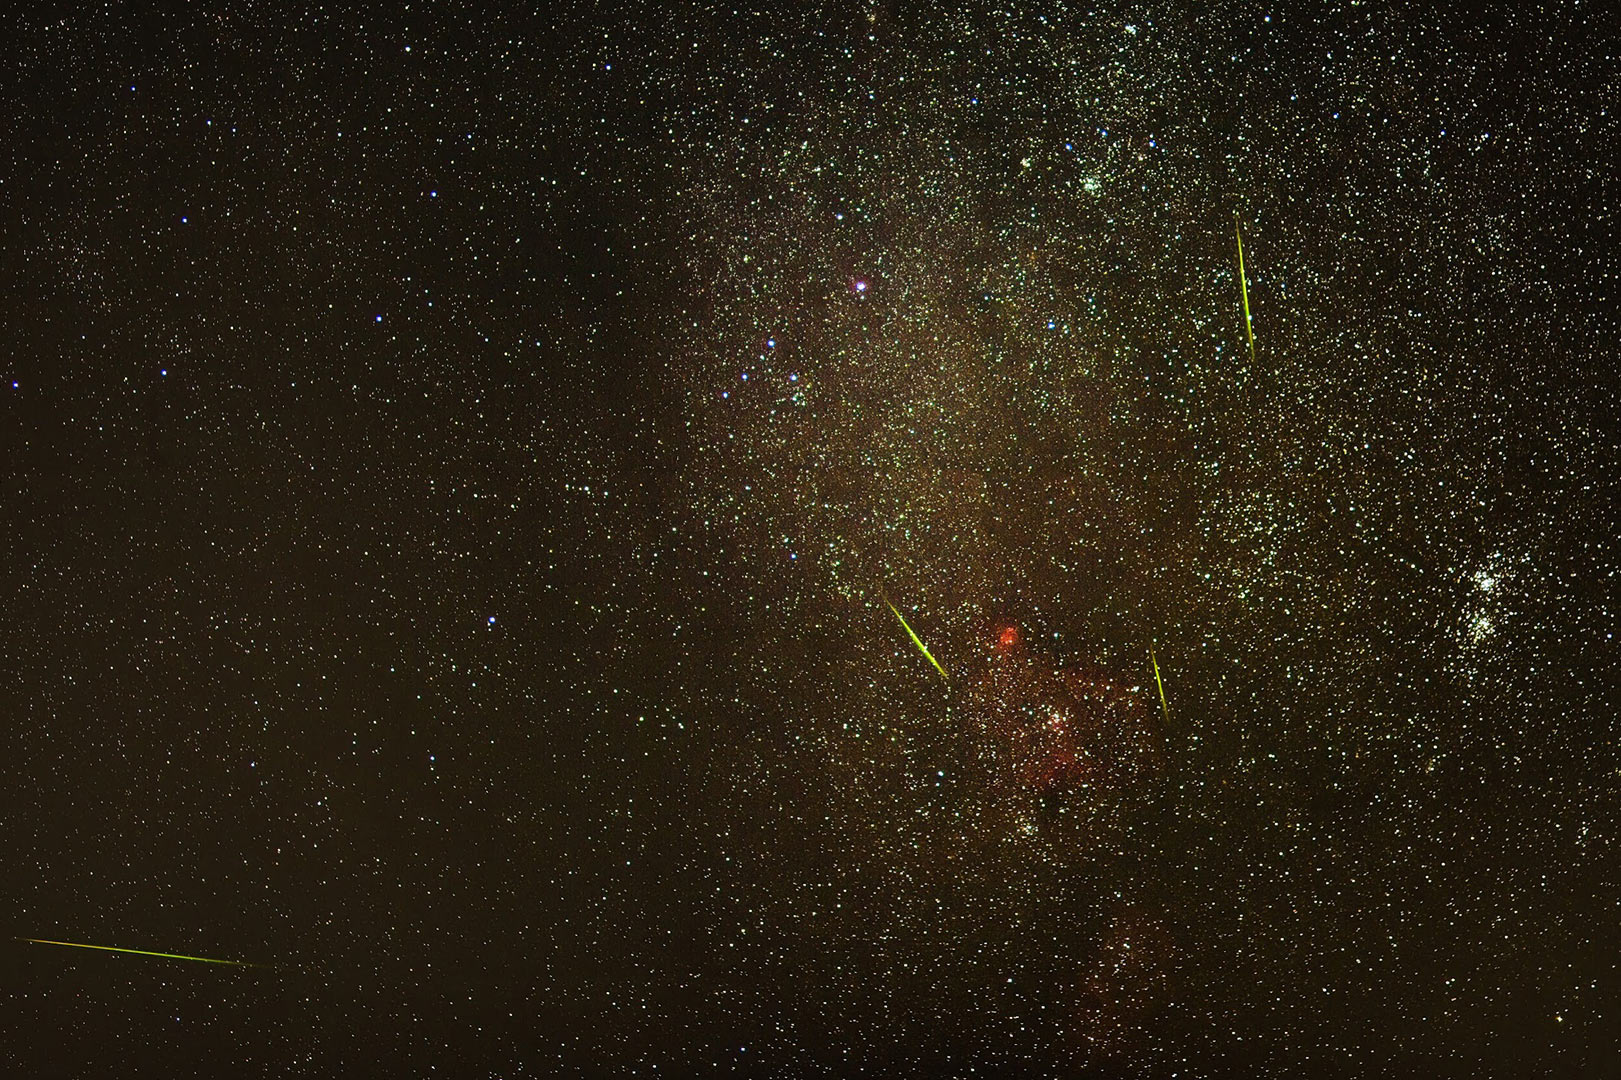 perseidsmeteorshower doublecluster stock2open cluster heartsoulnebulae ngc663opencluster